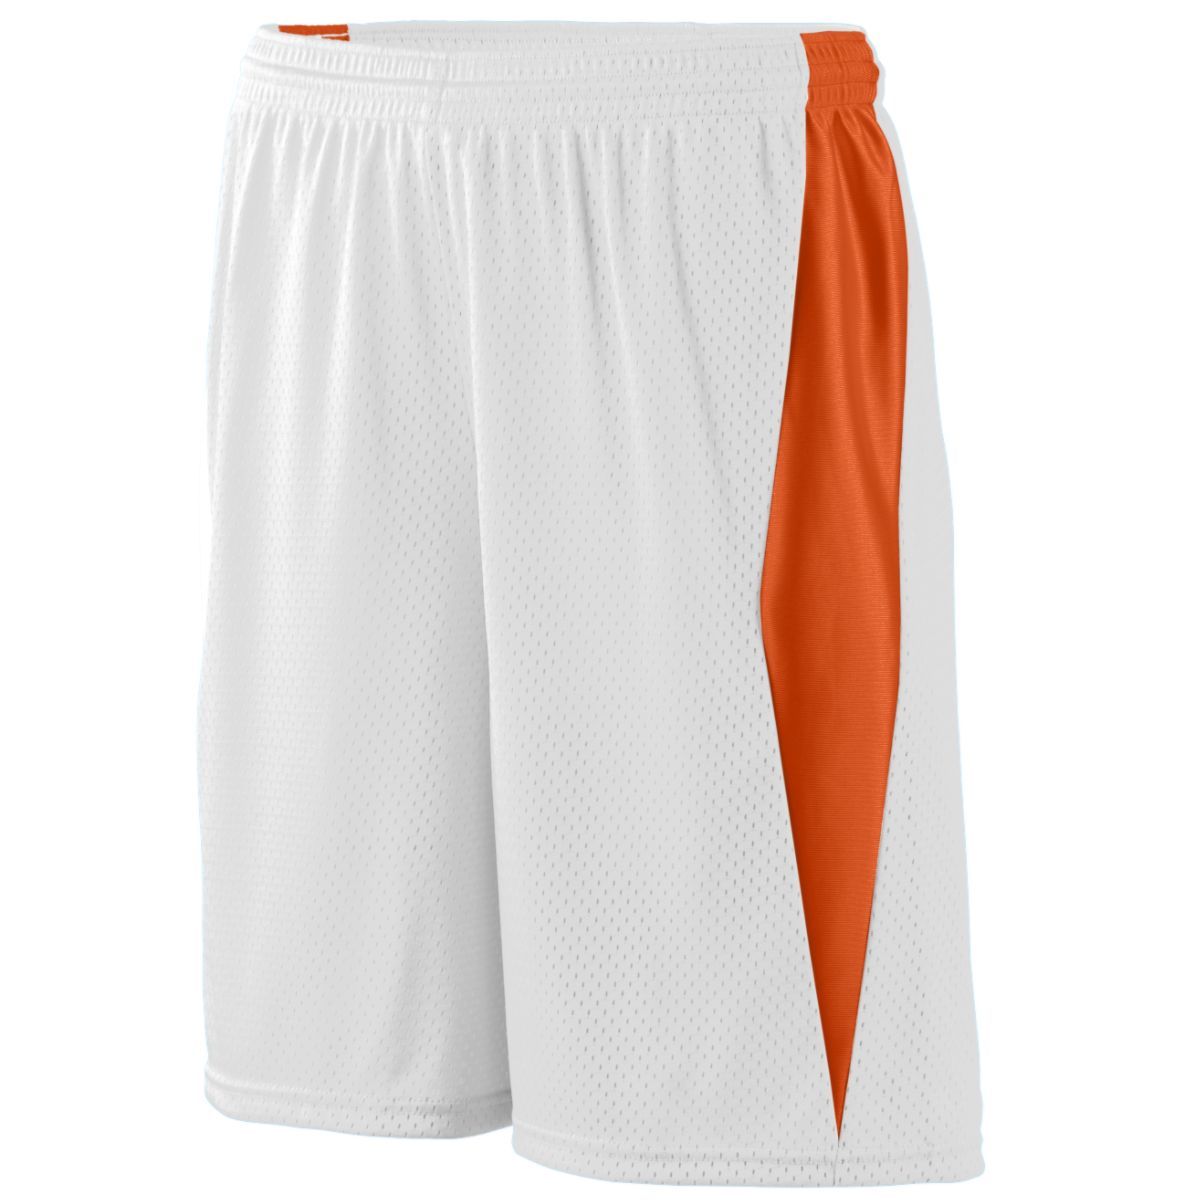 Augusta Sportswear Top Score Shorts in White/Orange  -Part of the Adult, Adult-Shorts, Augusta-Products, Lacrosse, All-Sports, All-Sports-1 product lines at KanaleyCreations.com